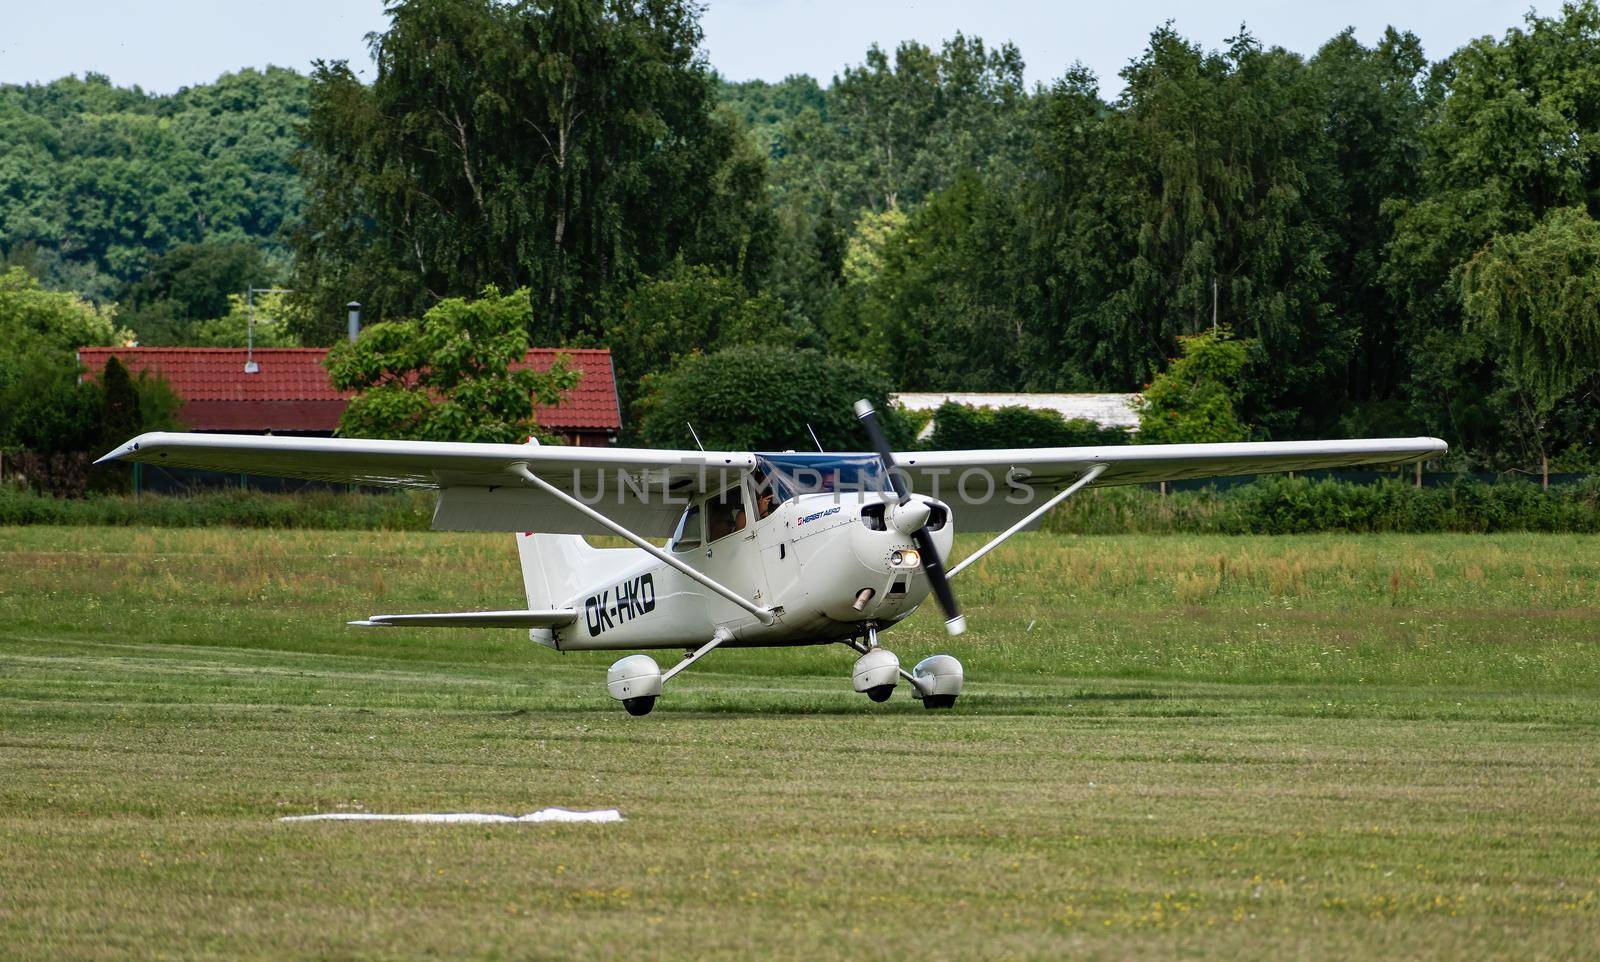 Cessna 172N light recreational aircraft during take-off at Breclav Airport by rostik924